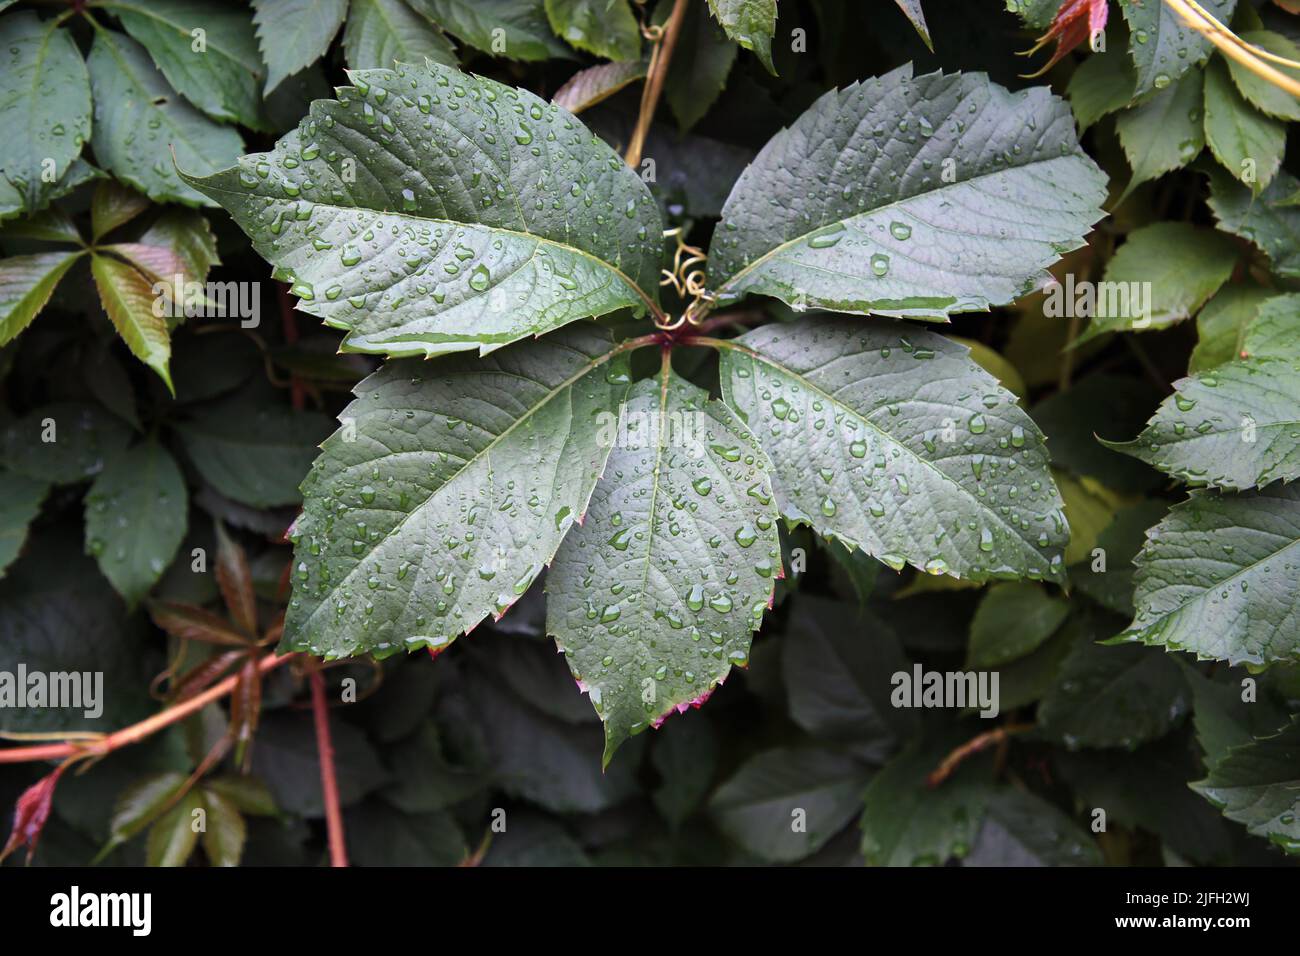 Green wall covered with a plant with a lot of green leaves. Photographed after a rain so the leaves have rain water drops on them. Beautiful natural. Stock Photo